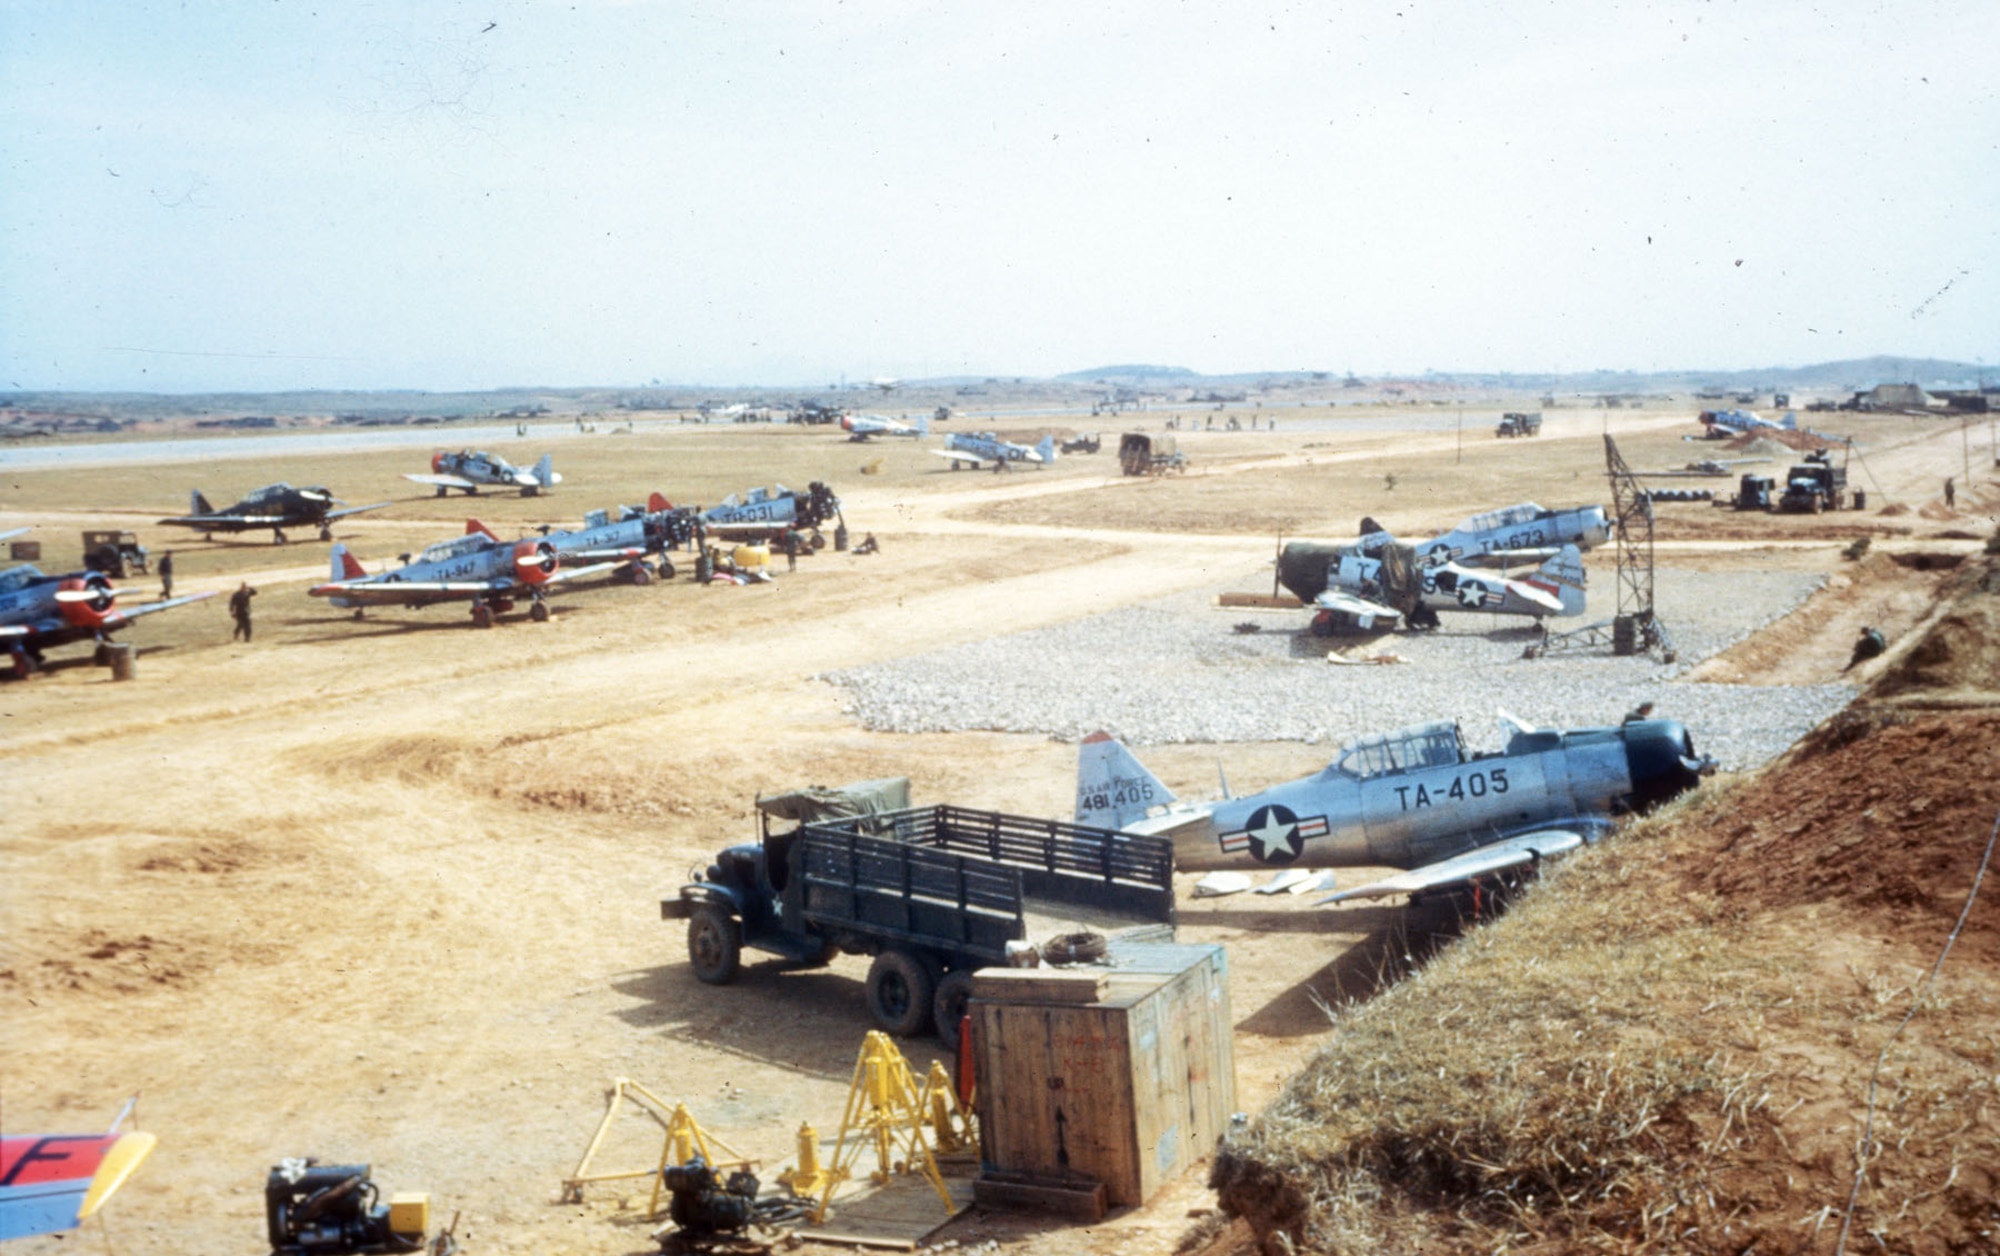 Mosquitos at K-6 (Pyongtaek) in the spring of 1951. The maintenance “shop” is the open-air gravel pad on the right of the photo. The taxiways are dirt and the PSP (pierced steel planking) runway is in the background on the left. (U.S. Air Force photo)